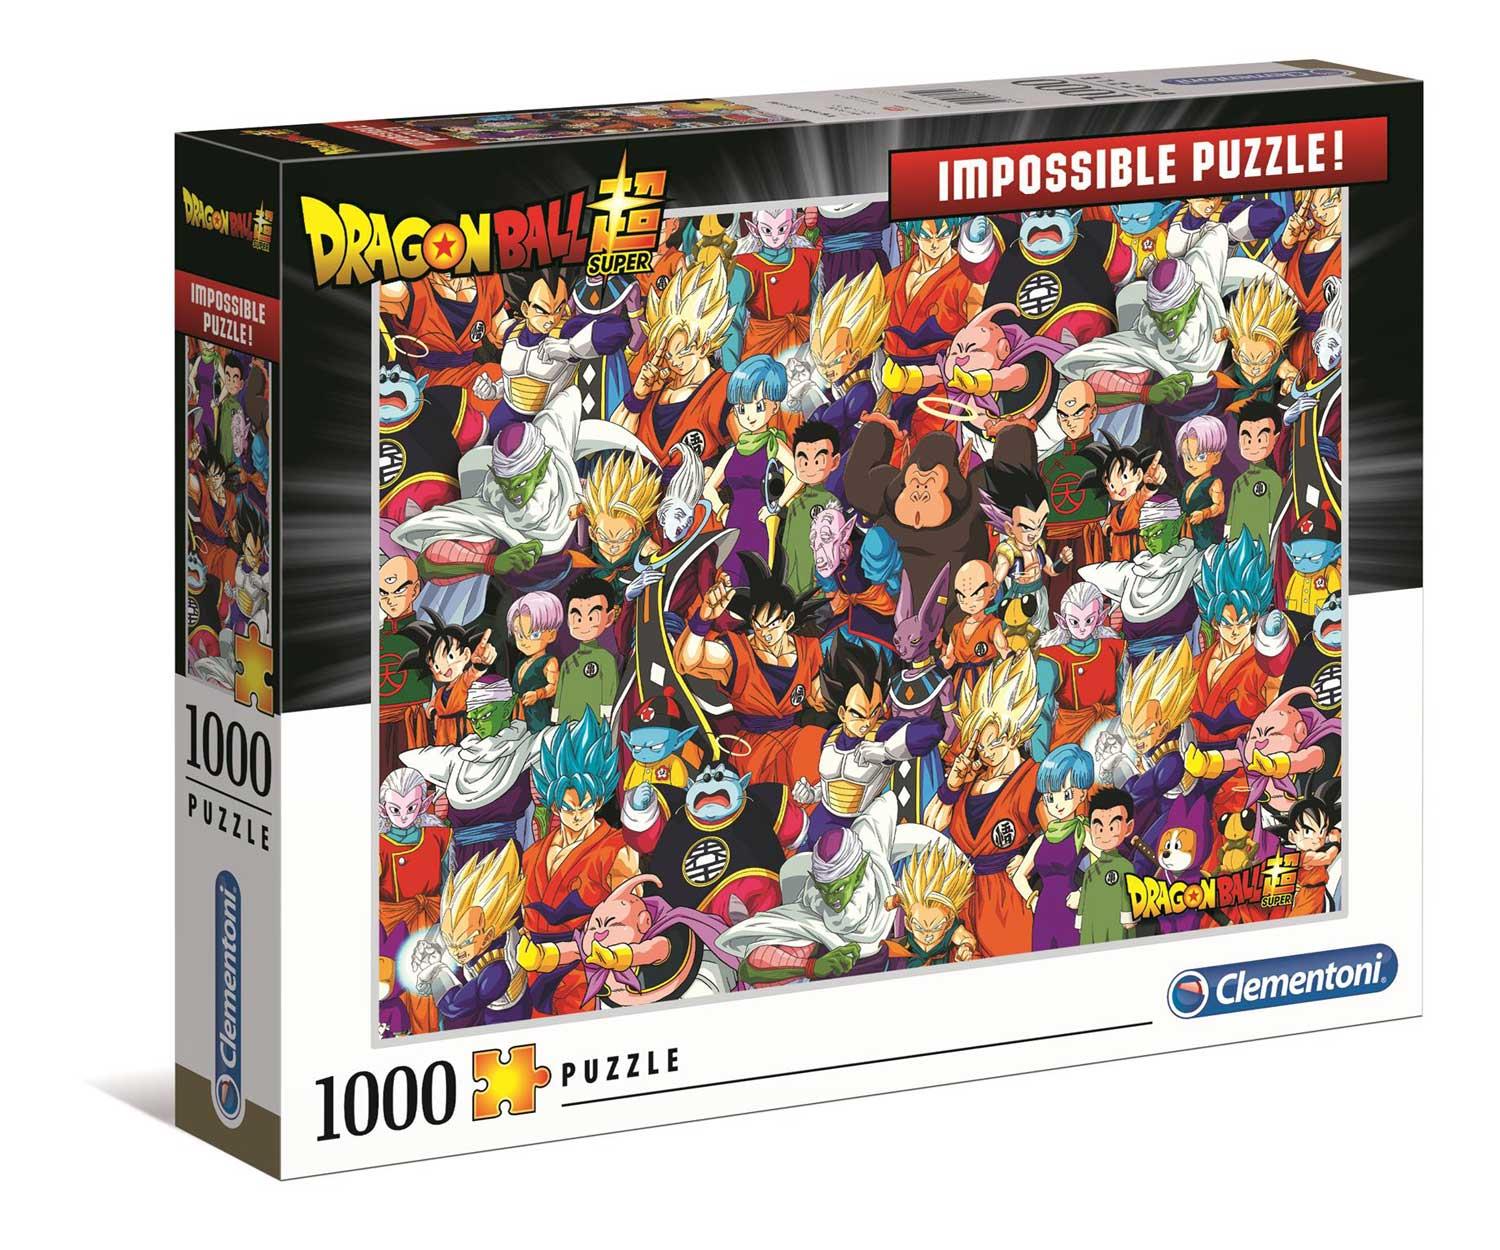 Impossible Dragon Ball Jigsaw Puzzle (1000 Pieces) - DAMAGED